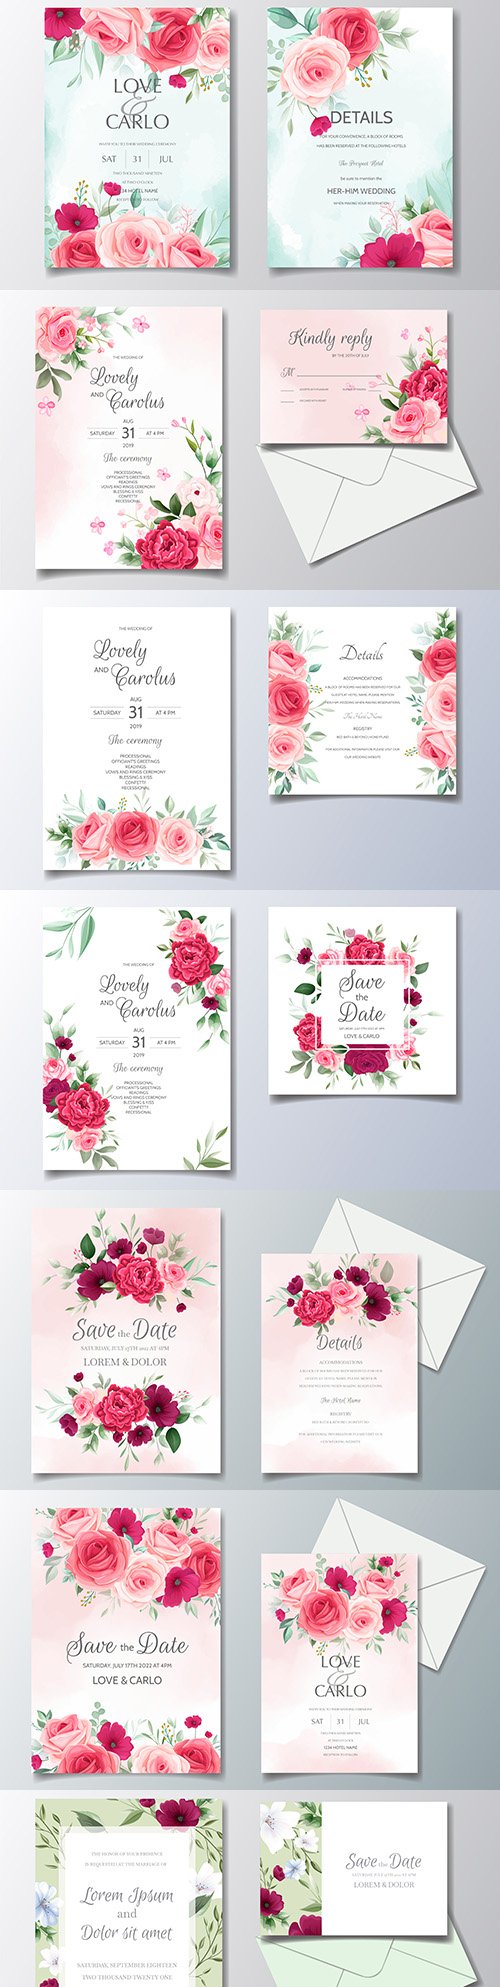 Elegant wedding invitation template with flowers and leaves